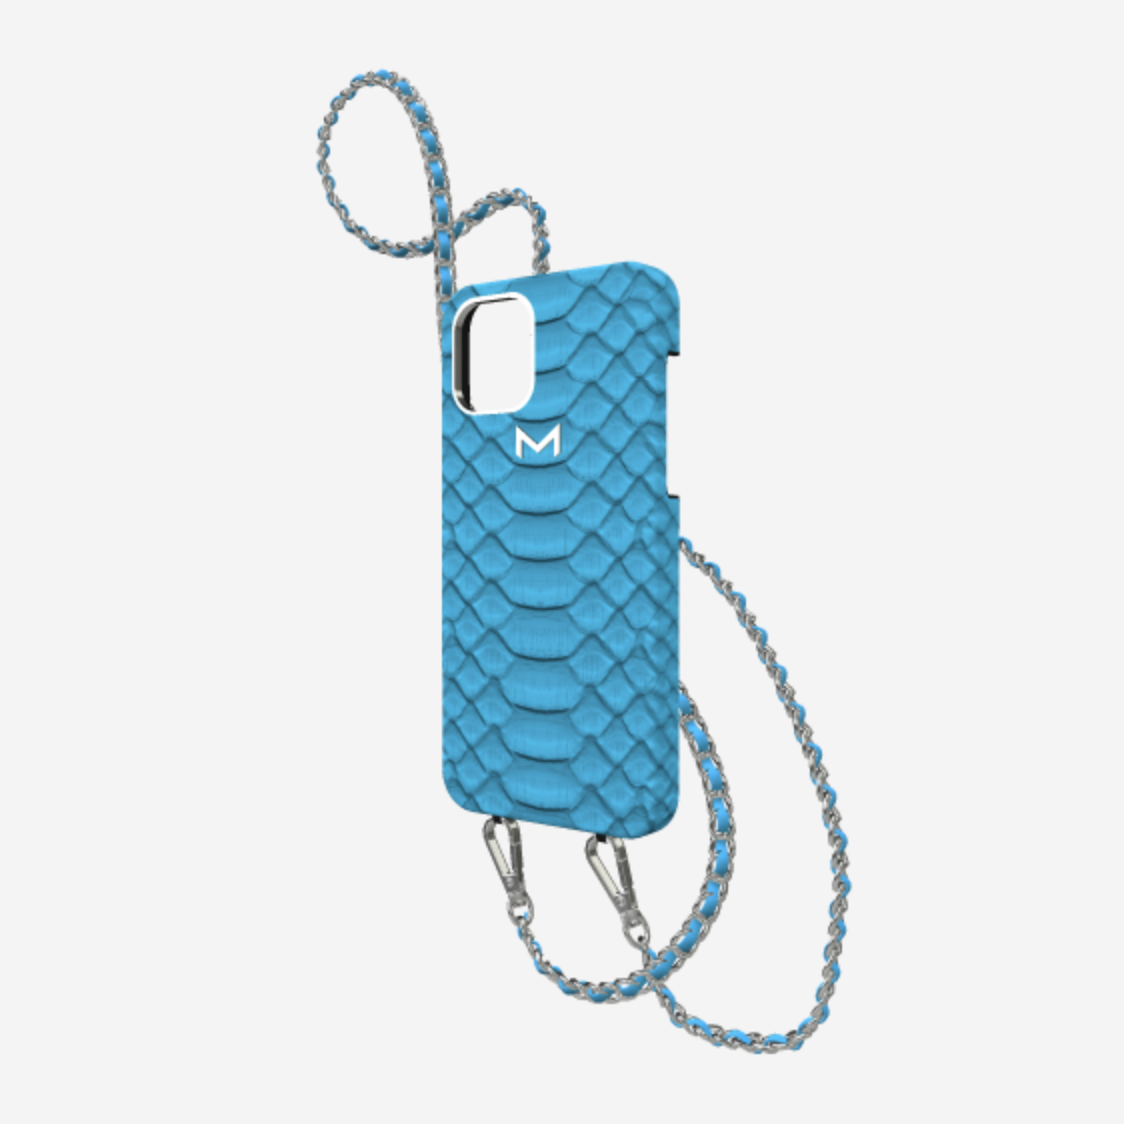 Necklace Case for iPhone 12 Pro Max in Genuine Python Tropical Blue Steel 316 